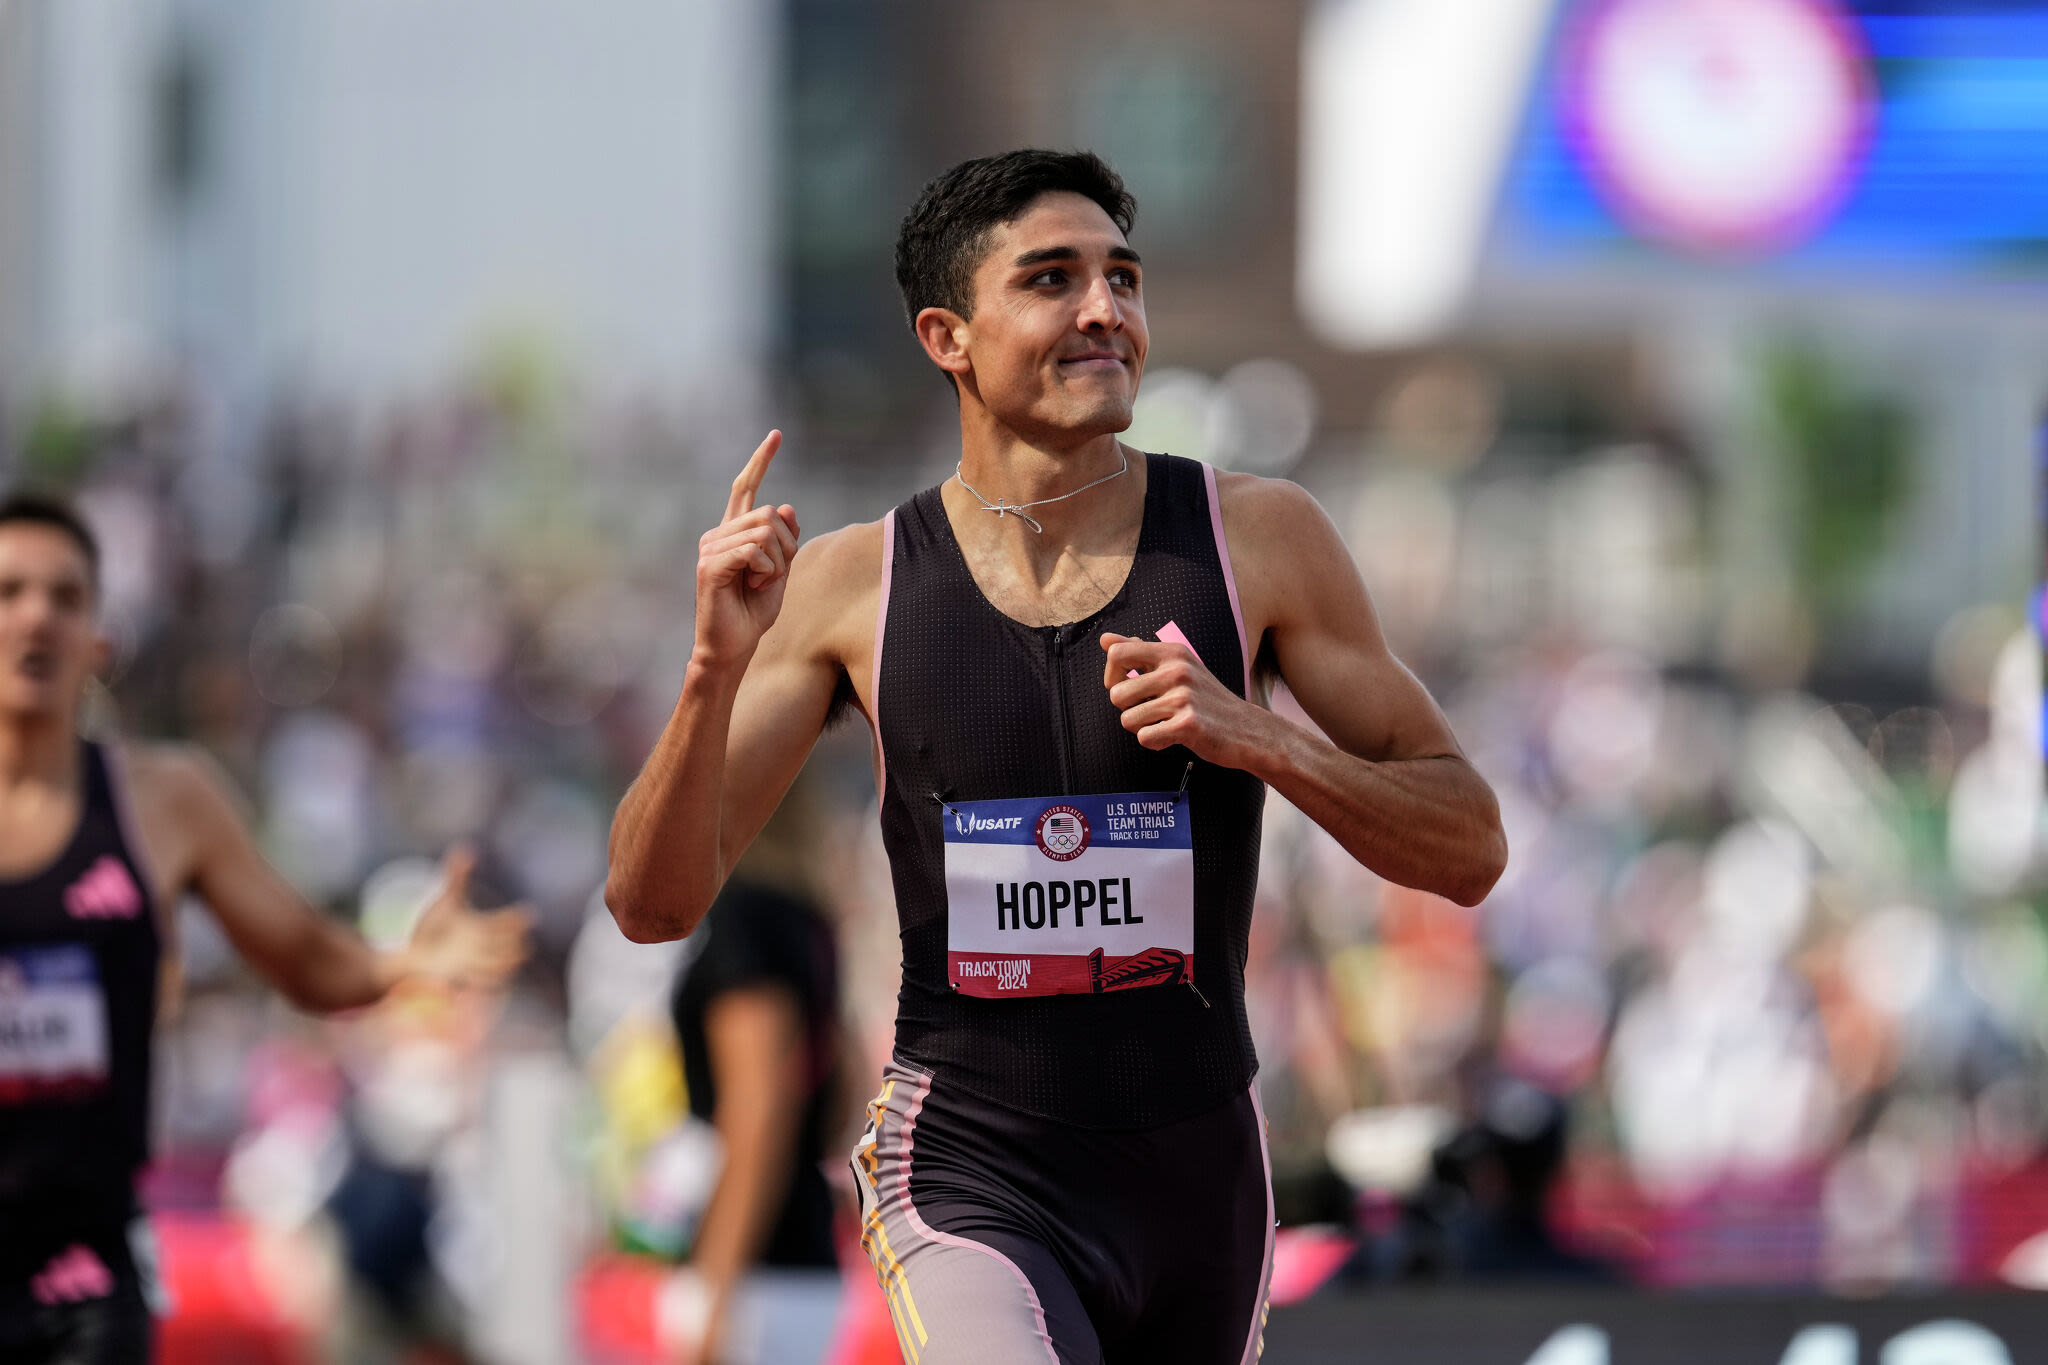 OLYMPICS: Hoppel equipped to take on fast 800 field in Paris